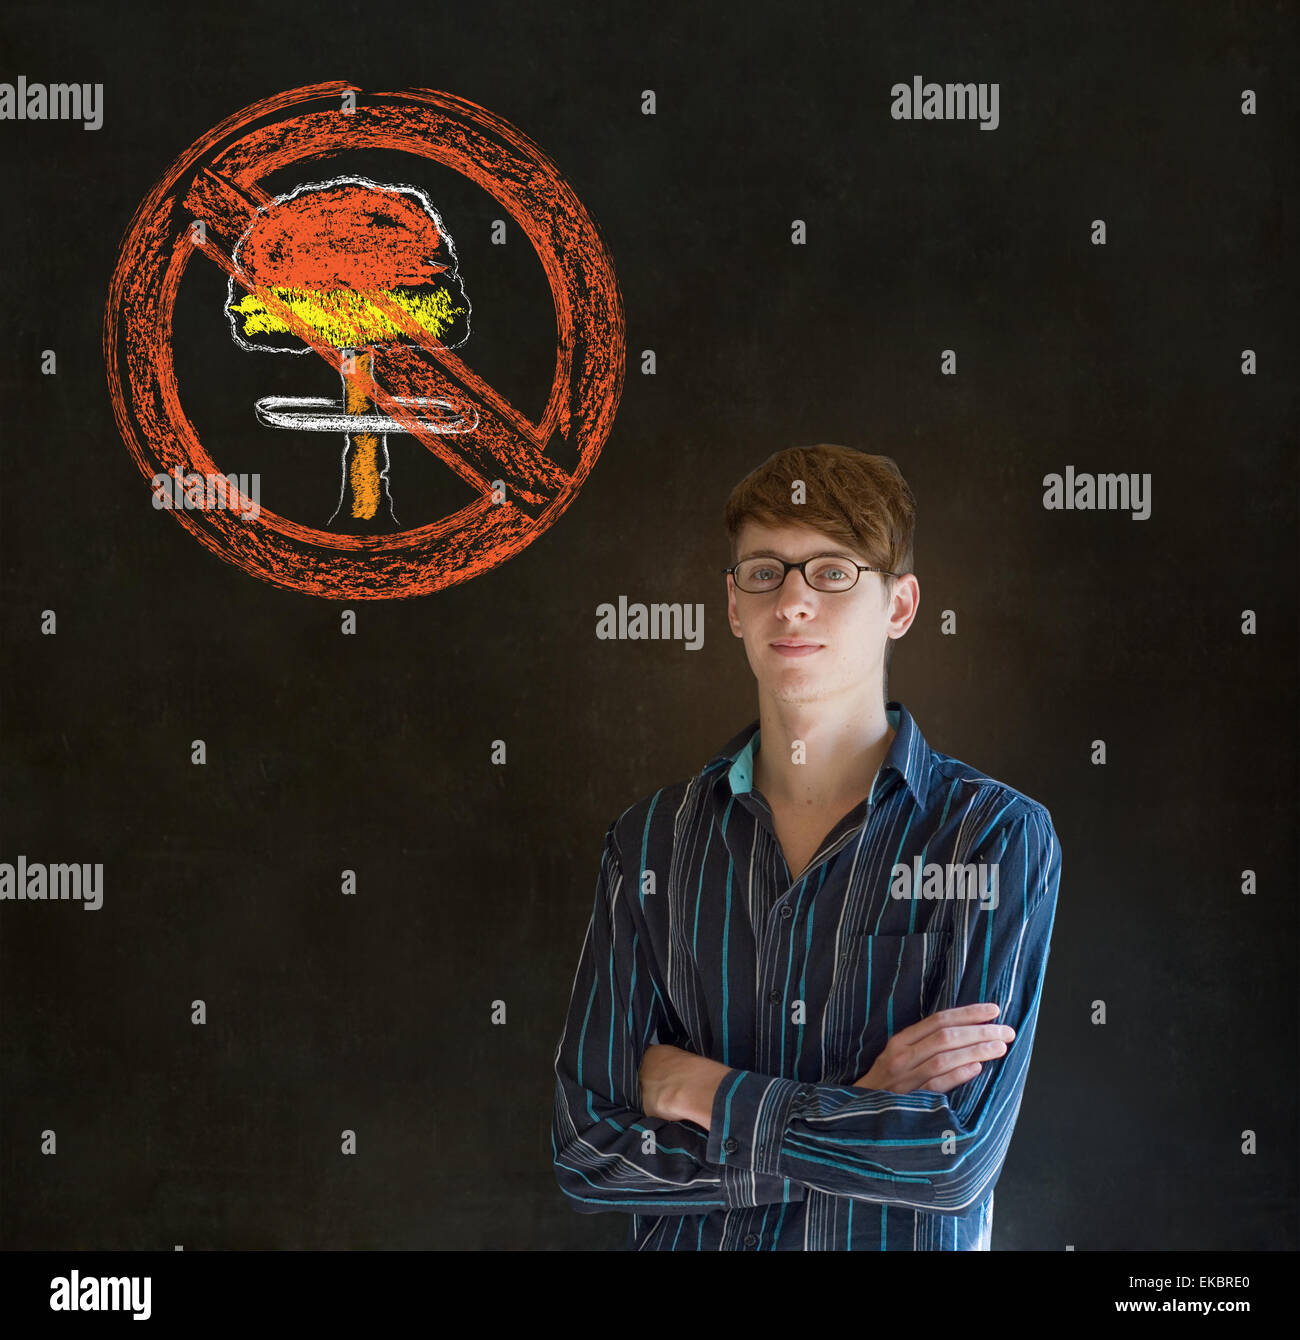 No nuclear war pacifist business man, student, teacher or politician on blackboard background Stock Photo